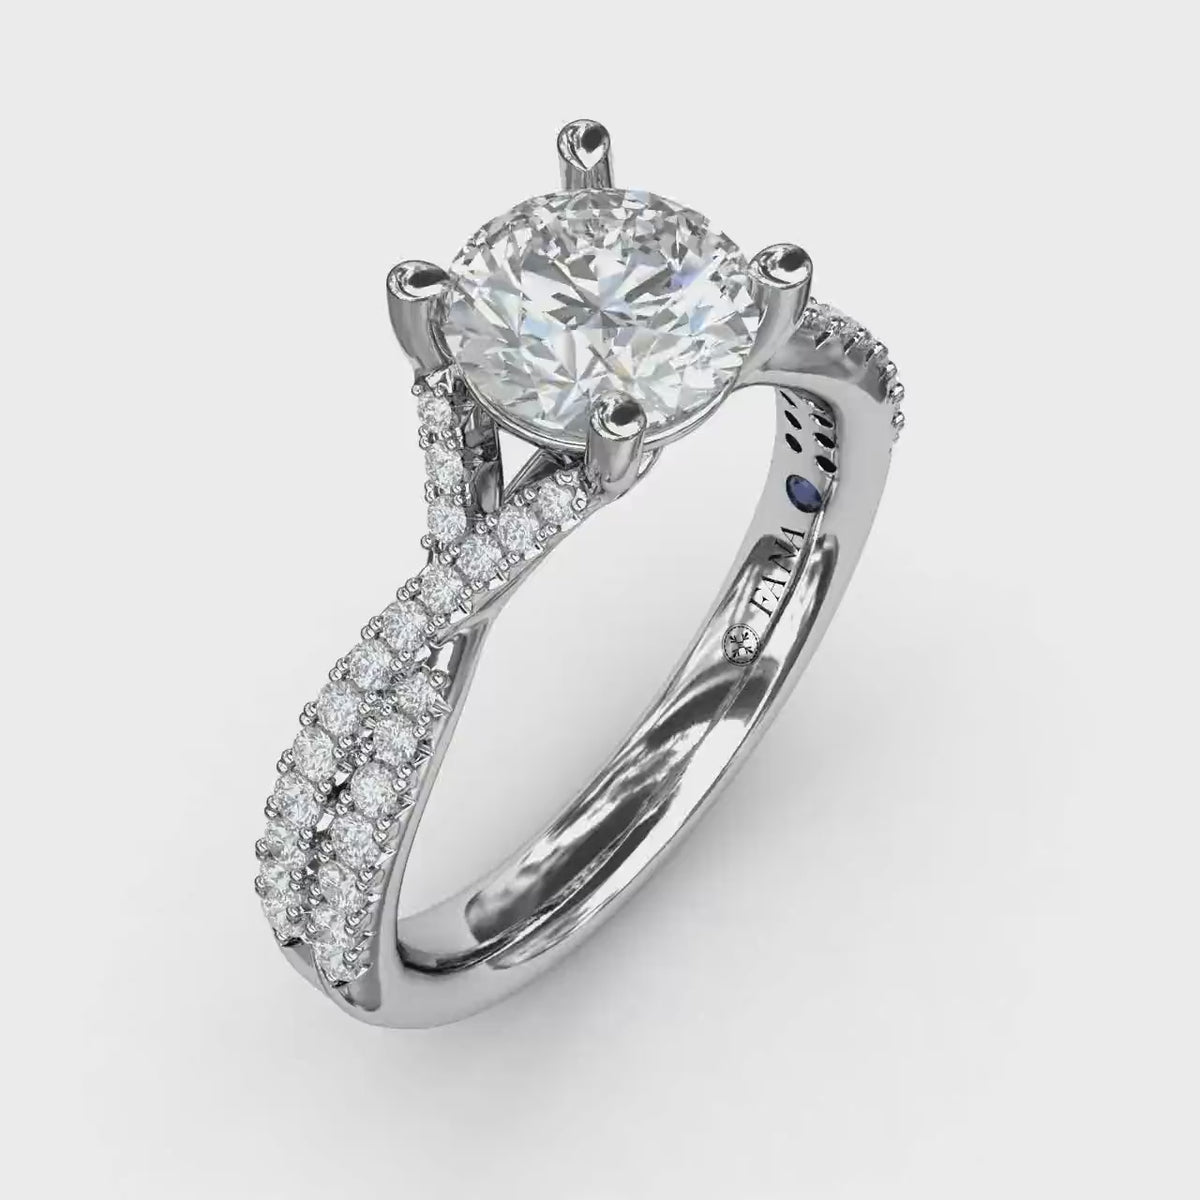 Fana - Delicate Late Twist Diamond Engagement Ring - S3619 - Available in 14K & 18K Gold (White, Yellow or Rose) and Platinum